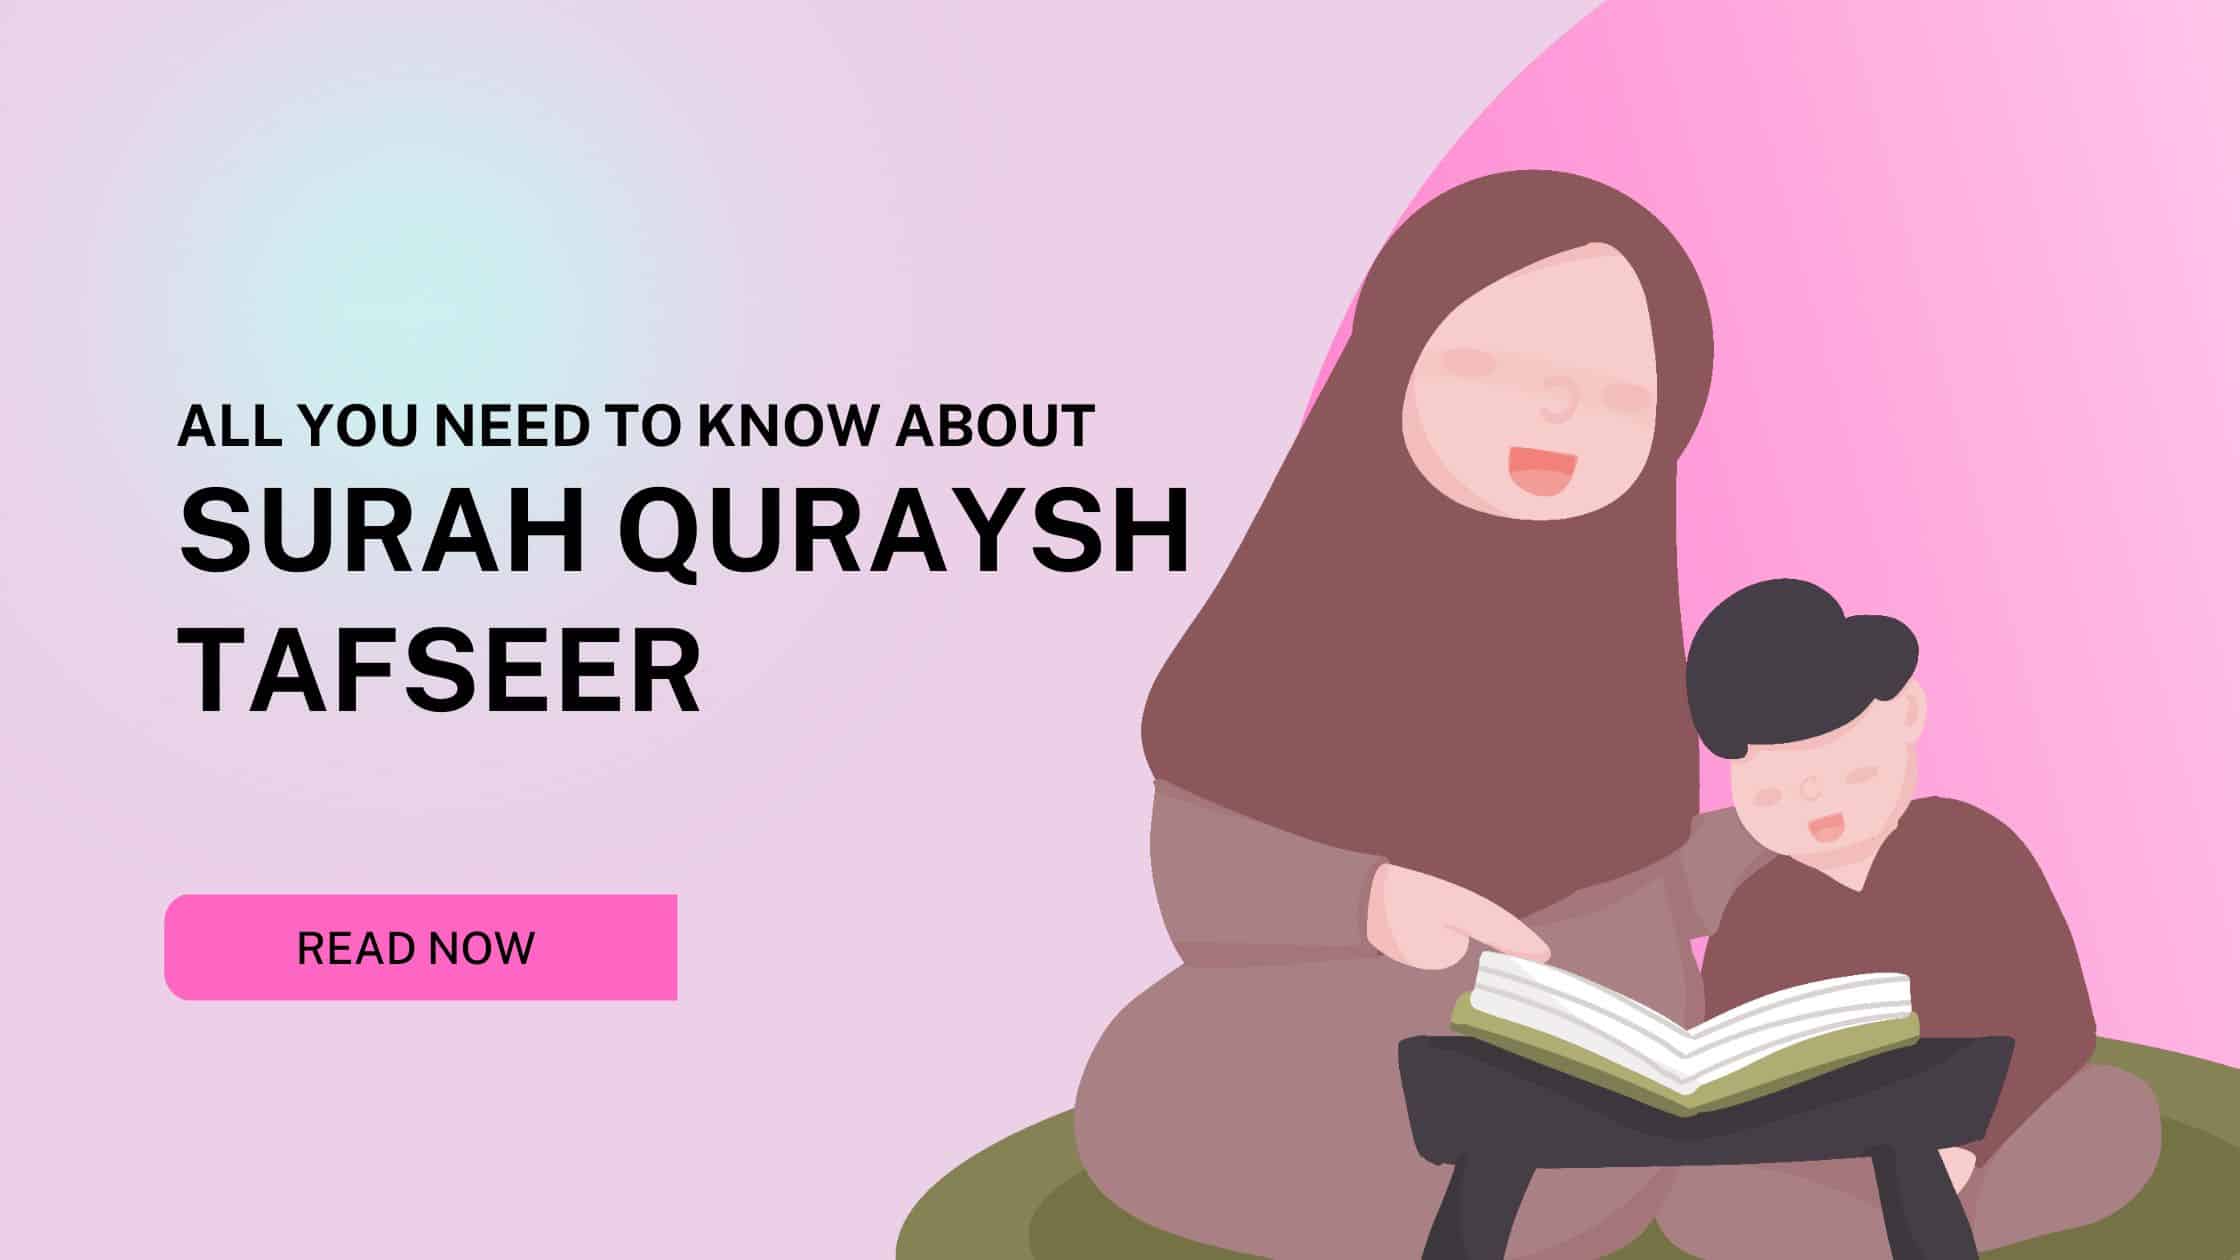 All You Need to Know About Surah Quraysh Tafseer